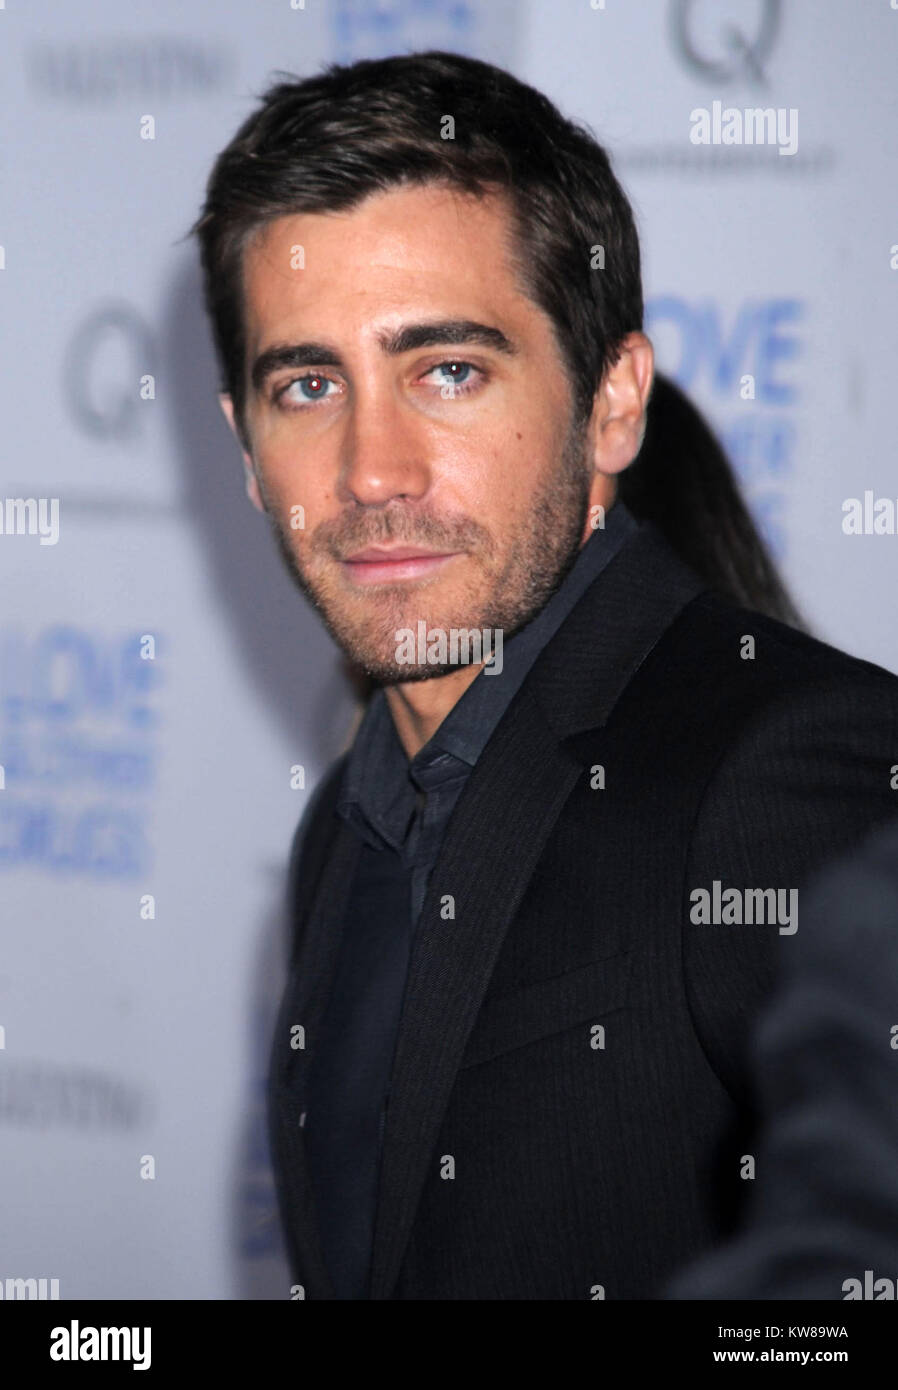 SMG NY1 Jake Gyllenhaal Love And Other Drugs 111610 15.JPG  NEW YORK - NOVEMBER 17: Jake Gyllenhaal attends the 'Love And Other Drugs' screening at the DGA Theater on November 16, 2010 in New York City.  (Photo By Storms Media Group)   People:  Jake Gyllenhaal Stock Photo